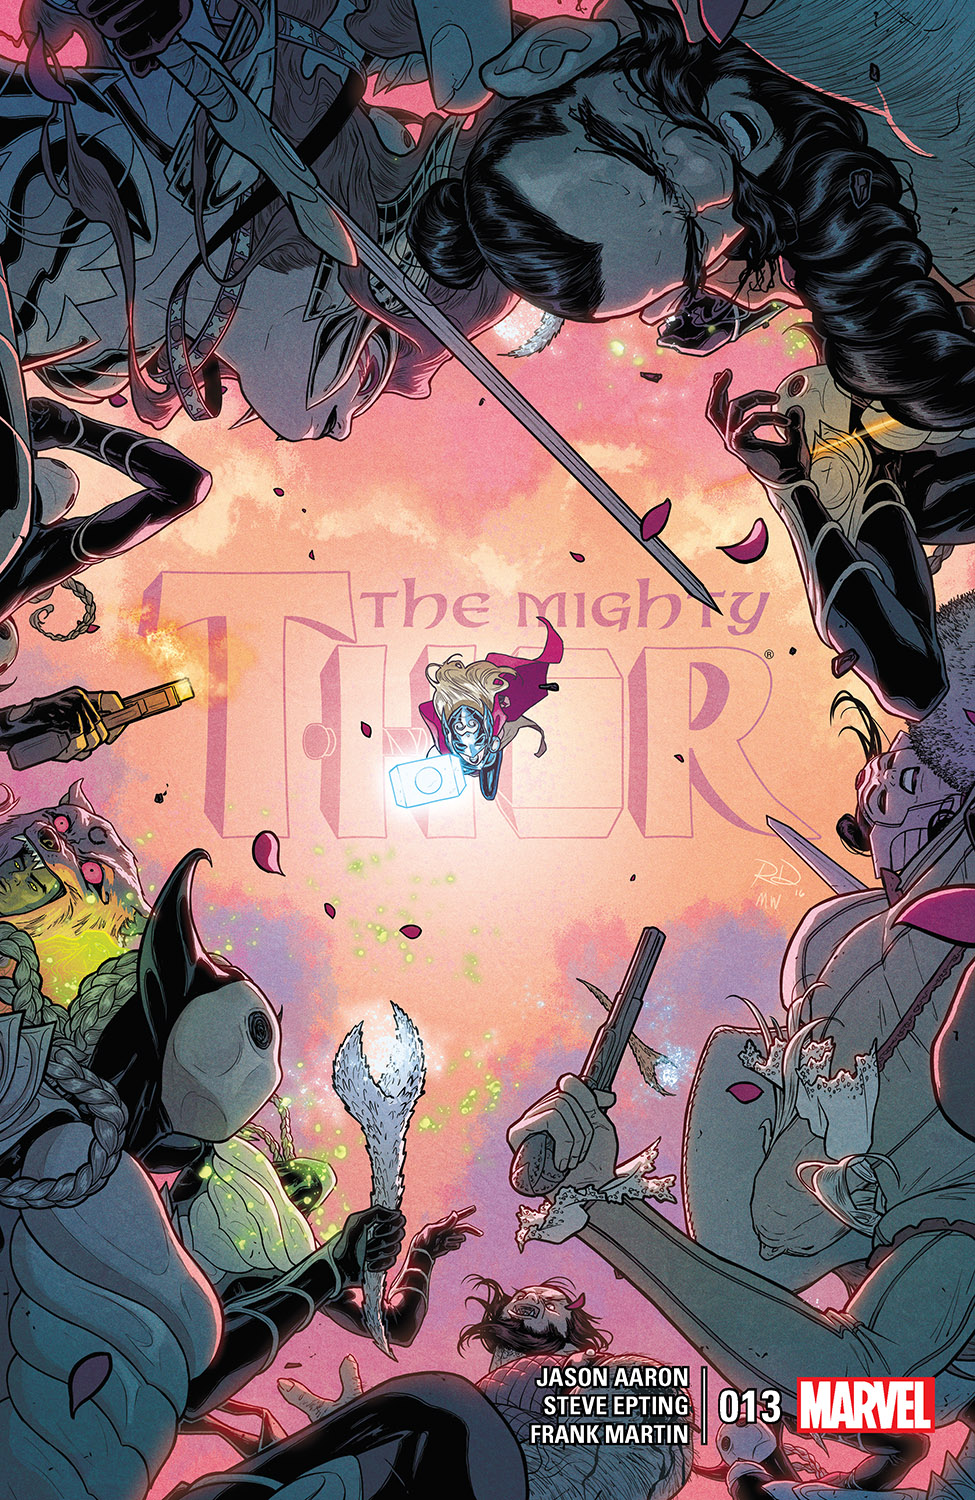 Mighty Thor (2015) #13